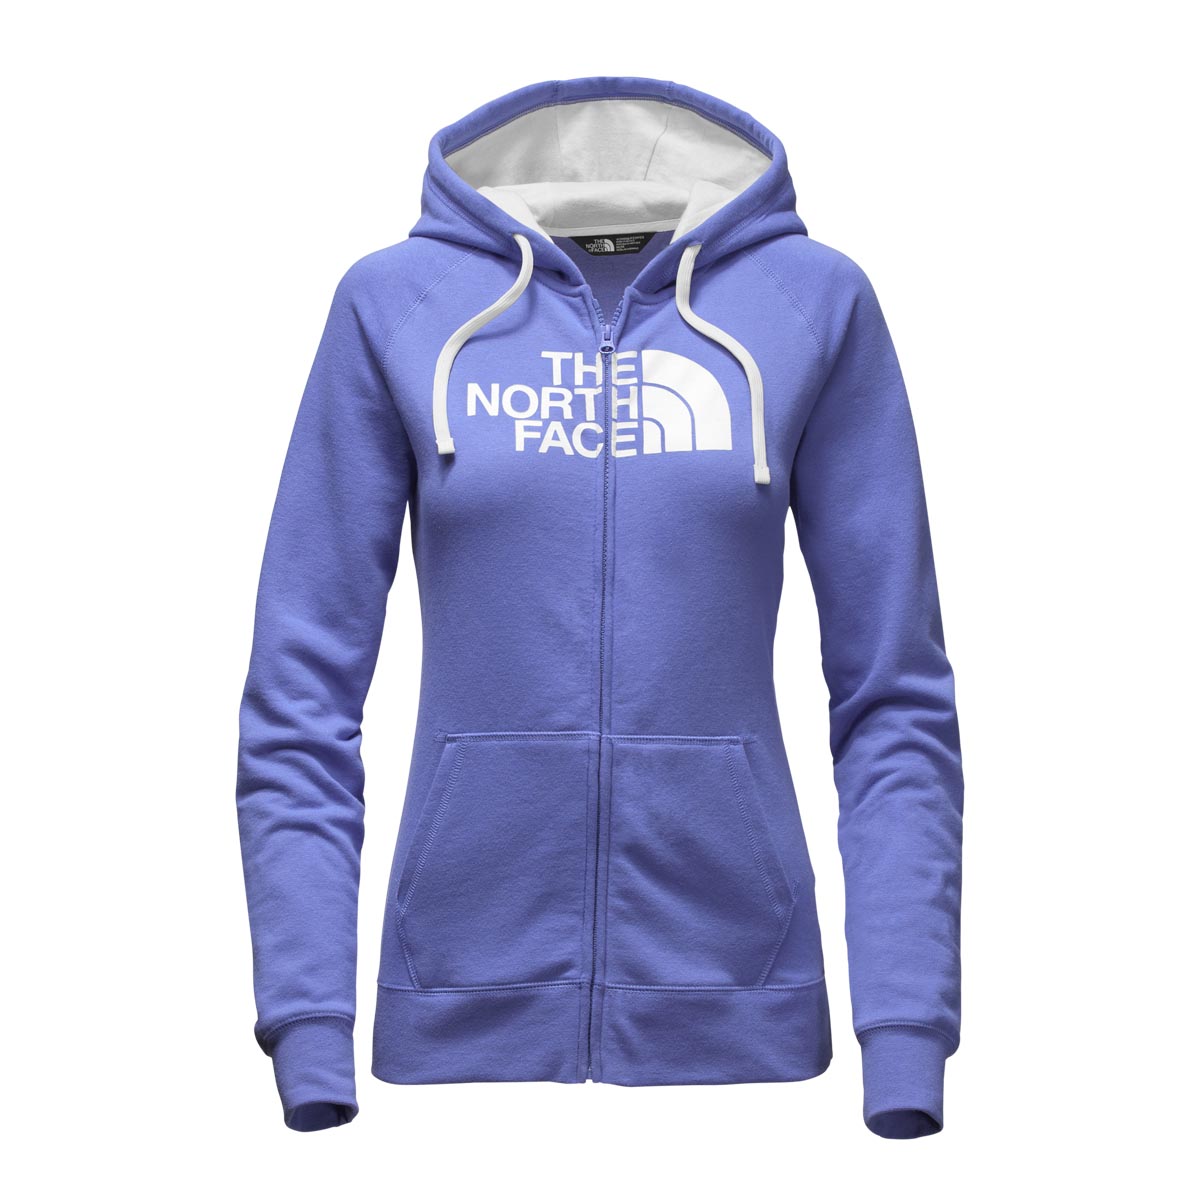 The North Face Women's Half Dome Full Zip Hoodie Discontinued Pricing